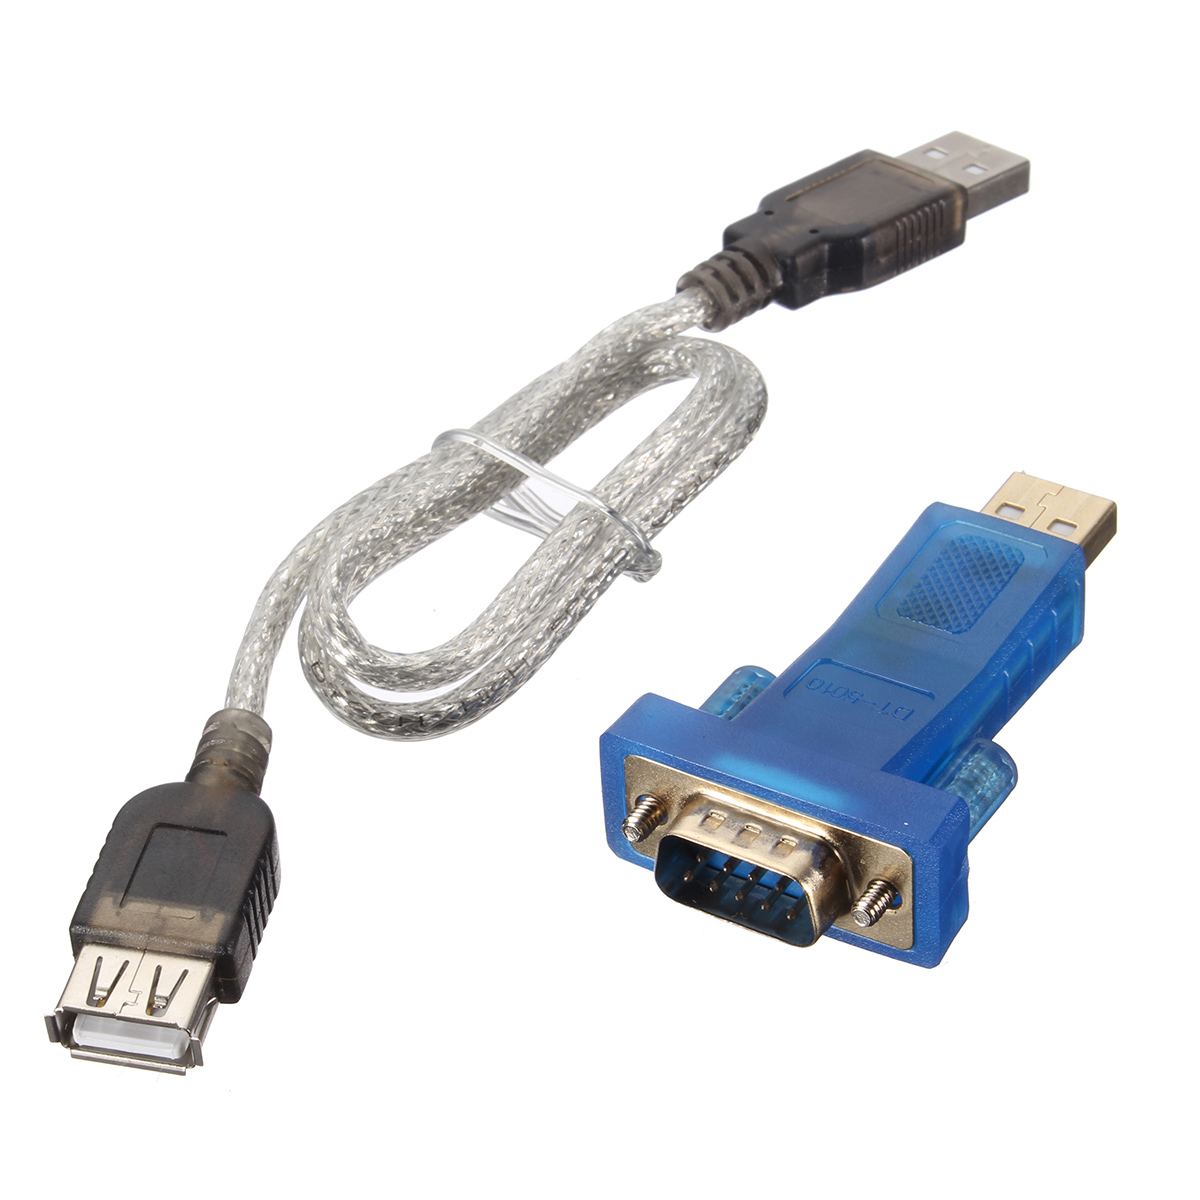 Dtech-DT-5010-USB-to-RS232-Serial-Port-Adapter-1147444